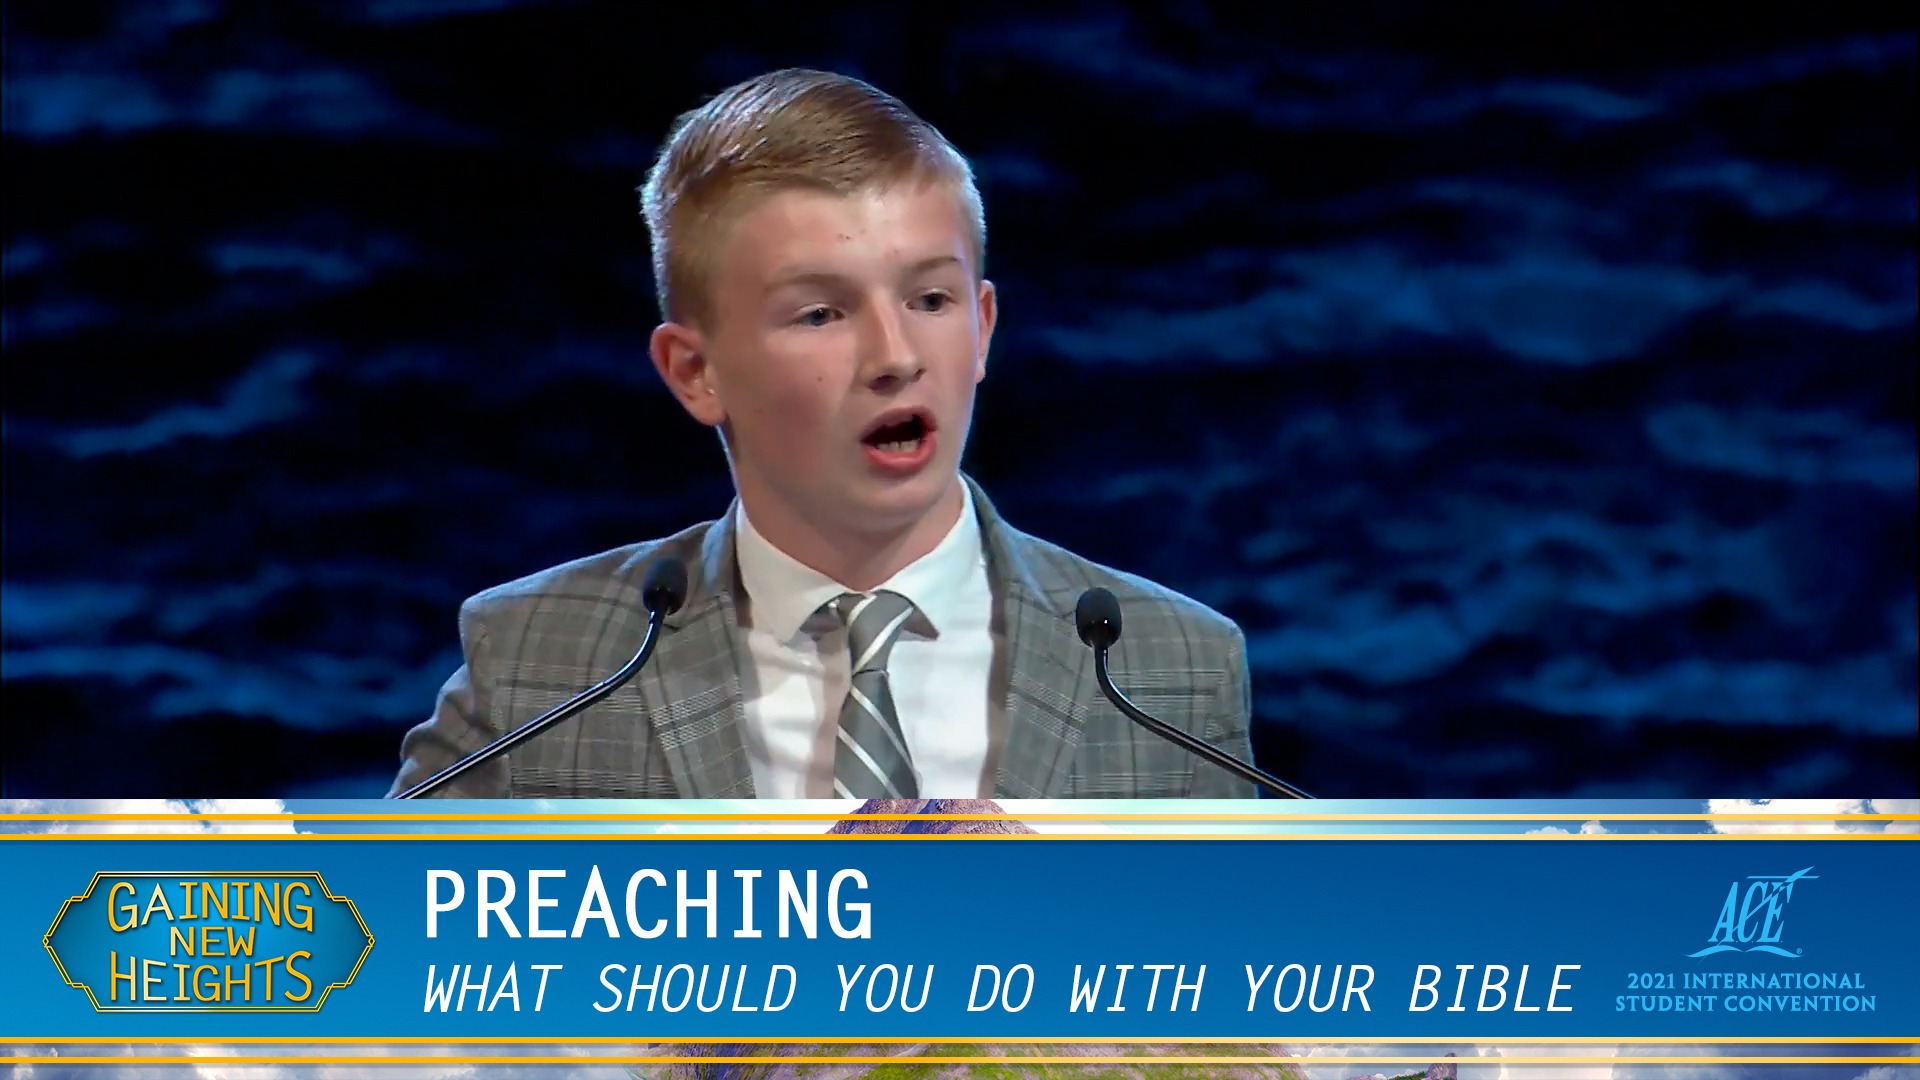 Preaching, "What Should You Do With Your Bible?" - ISC 2021